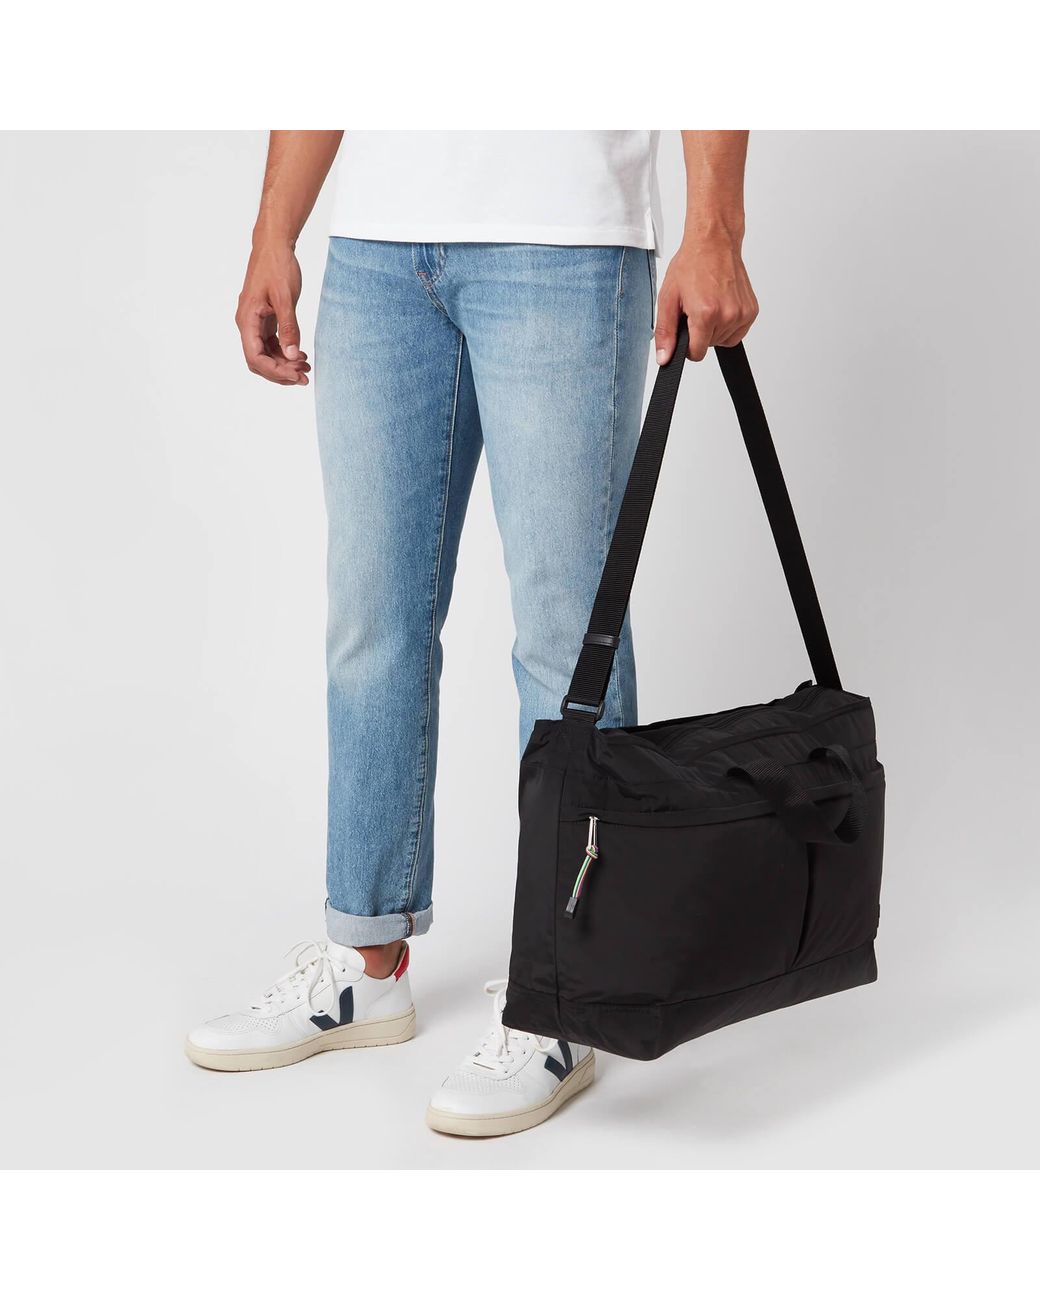 PS by Paul Smith Zebra Logo Canvas Weekend Bag in Black for Men | Lyst